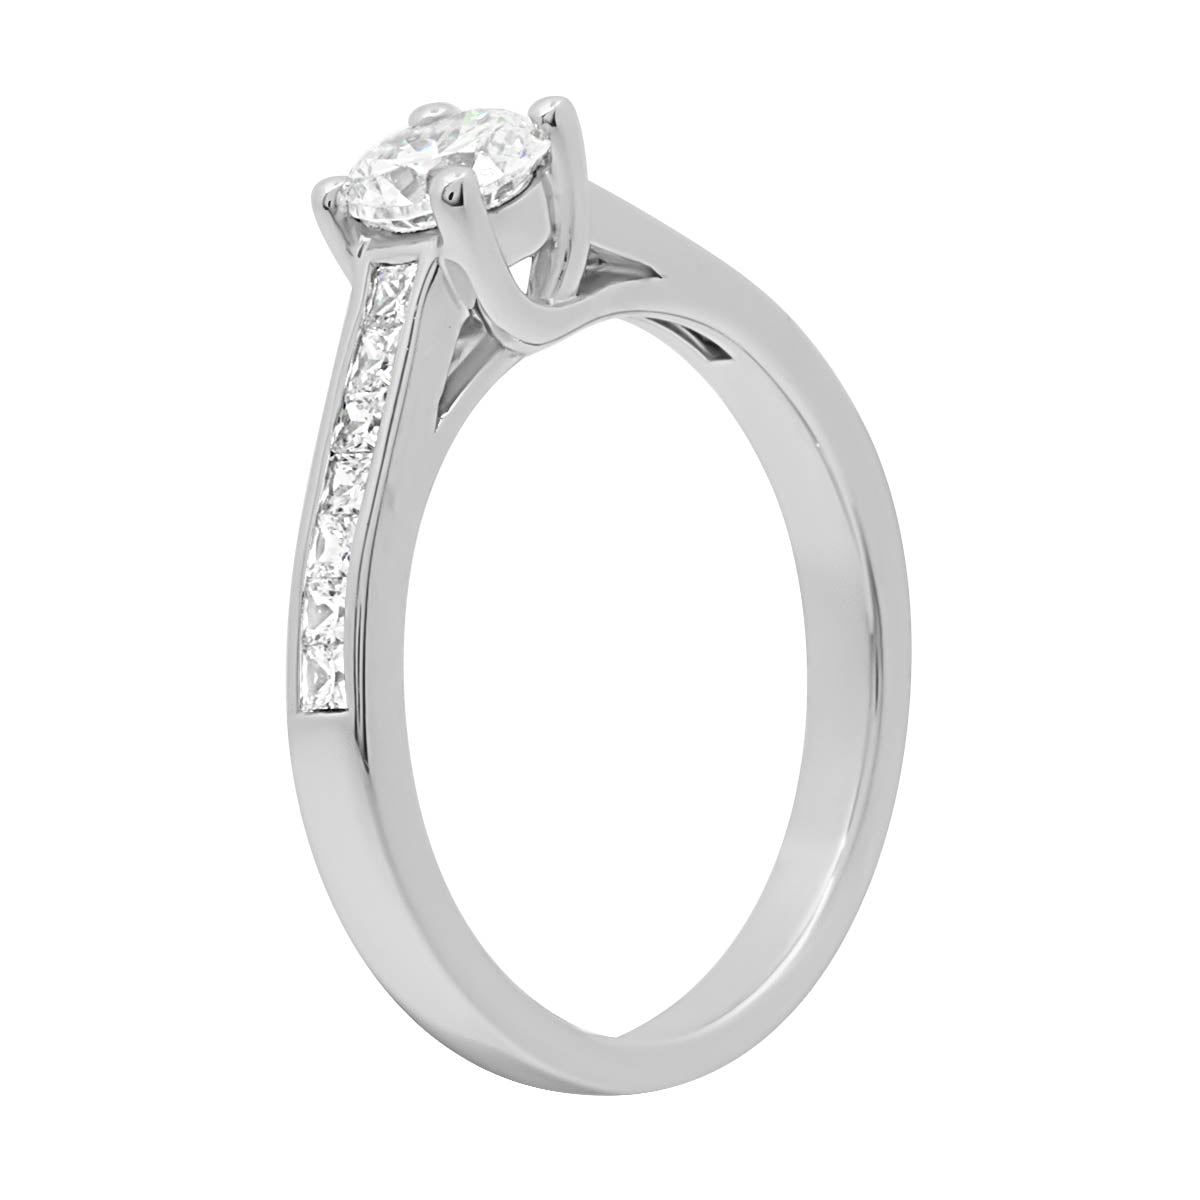 Round Diamond with Channel Set Princess Cut Diamonds in platinum in angled view